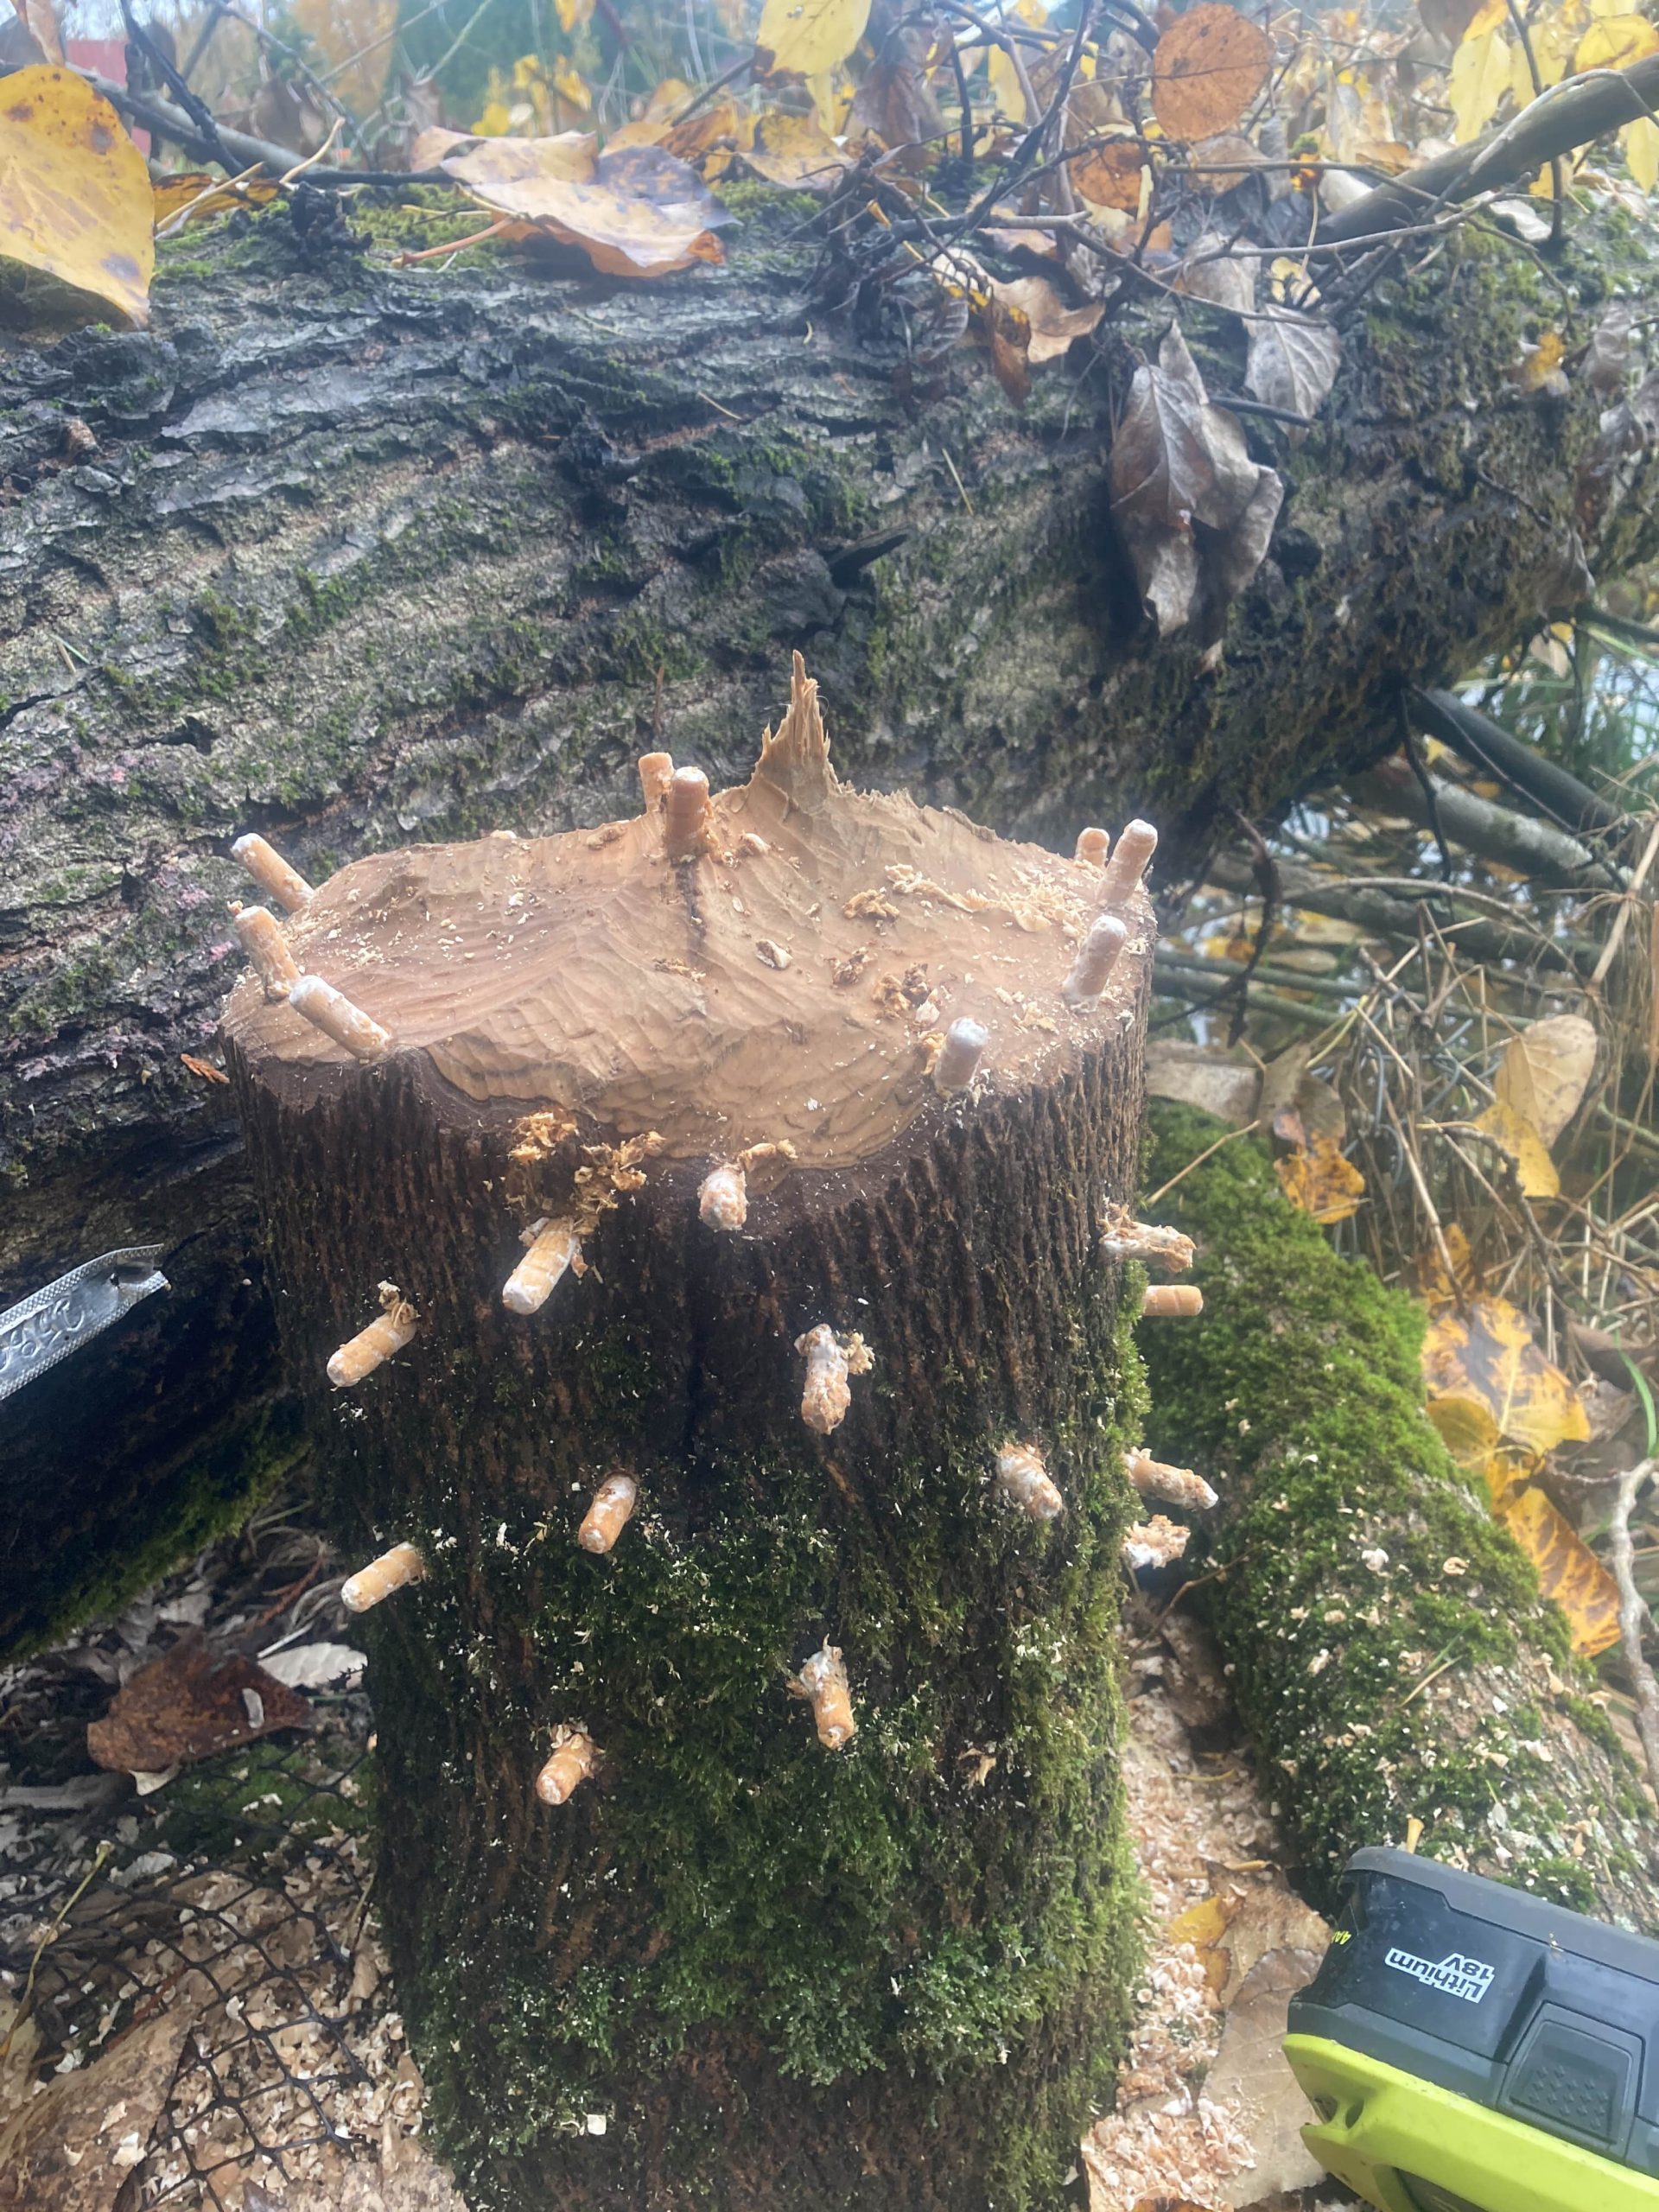 A picture of a chewed up stump with mushroom on it